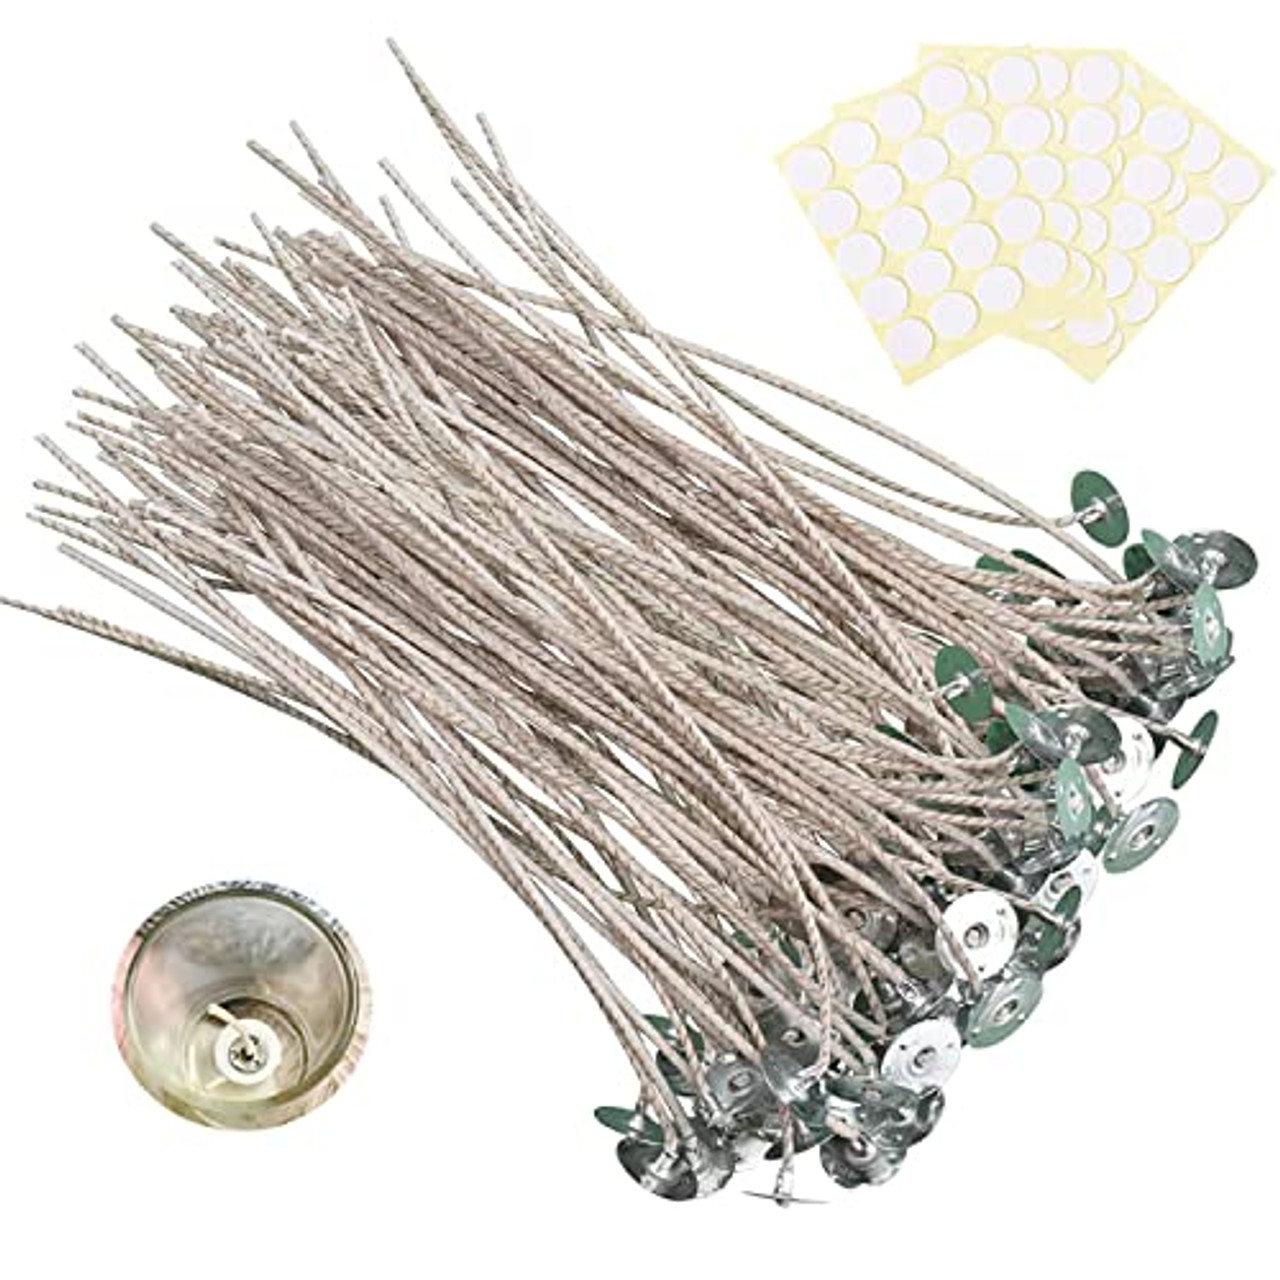 100pcs ECO Wicks for Soy Candles, 6 inch Pre-Waxed Candle Wick for